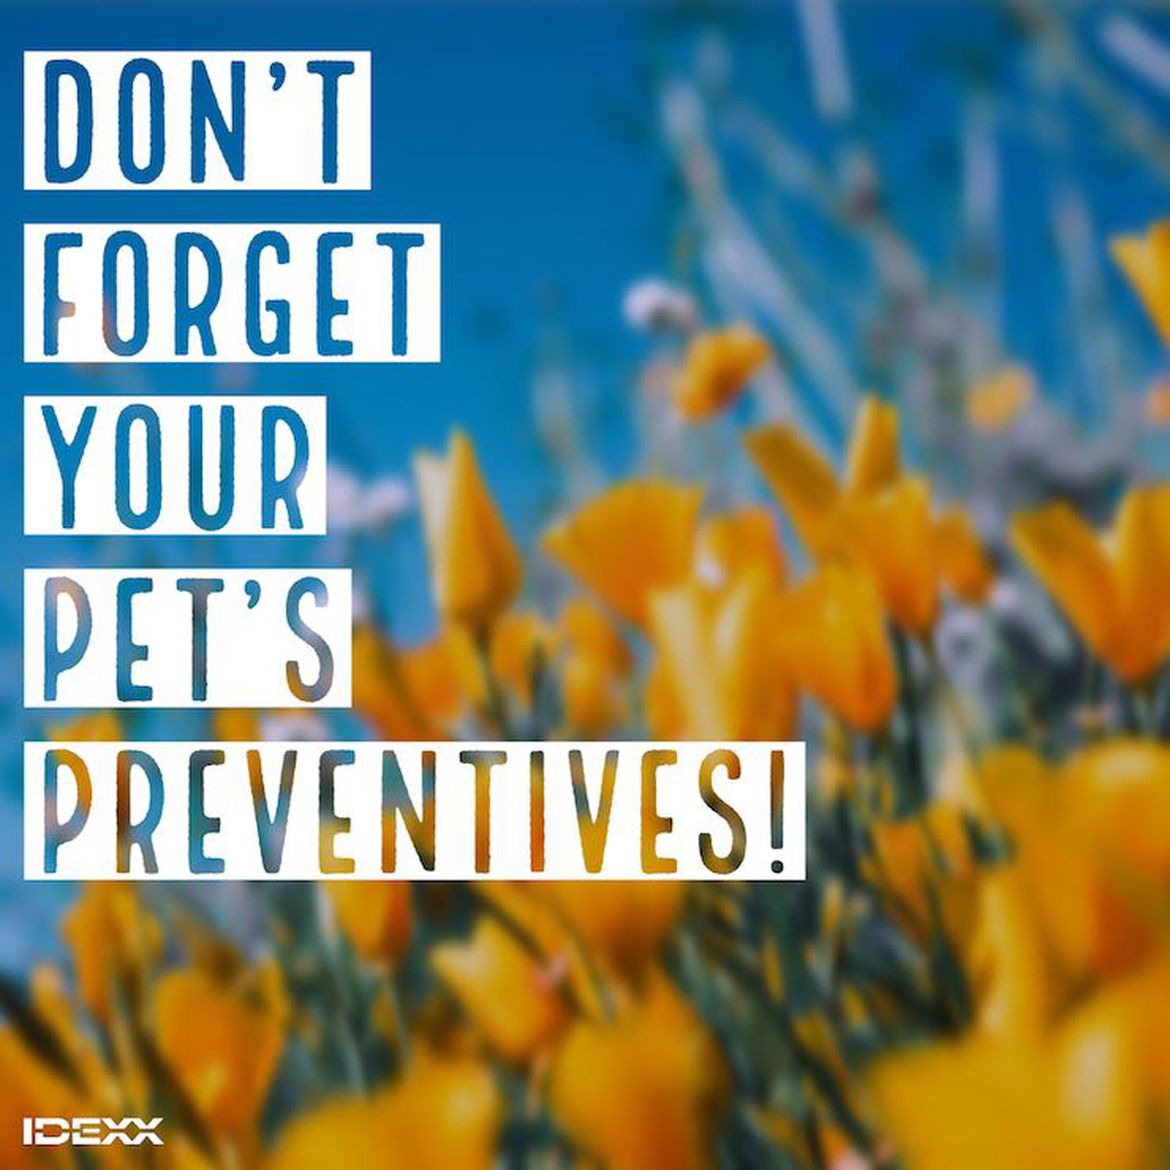 Social media post on not forgetting monthly preventives for pets